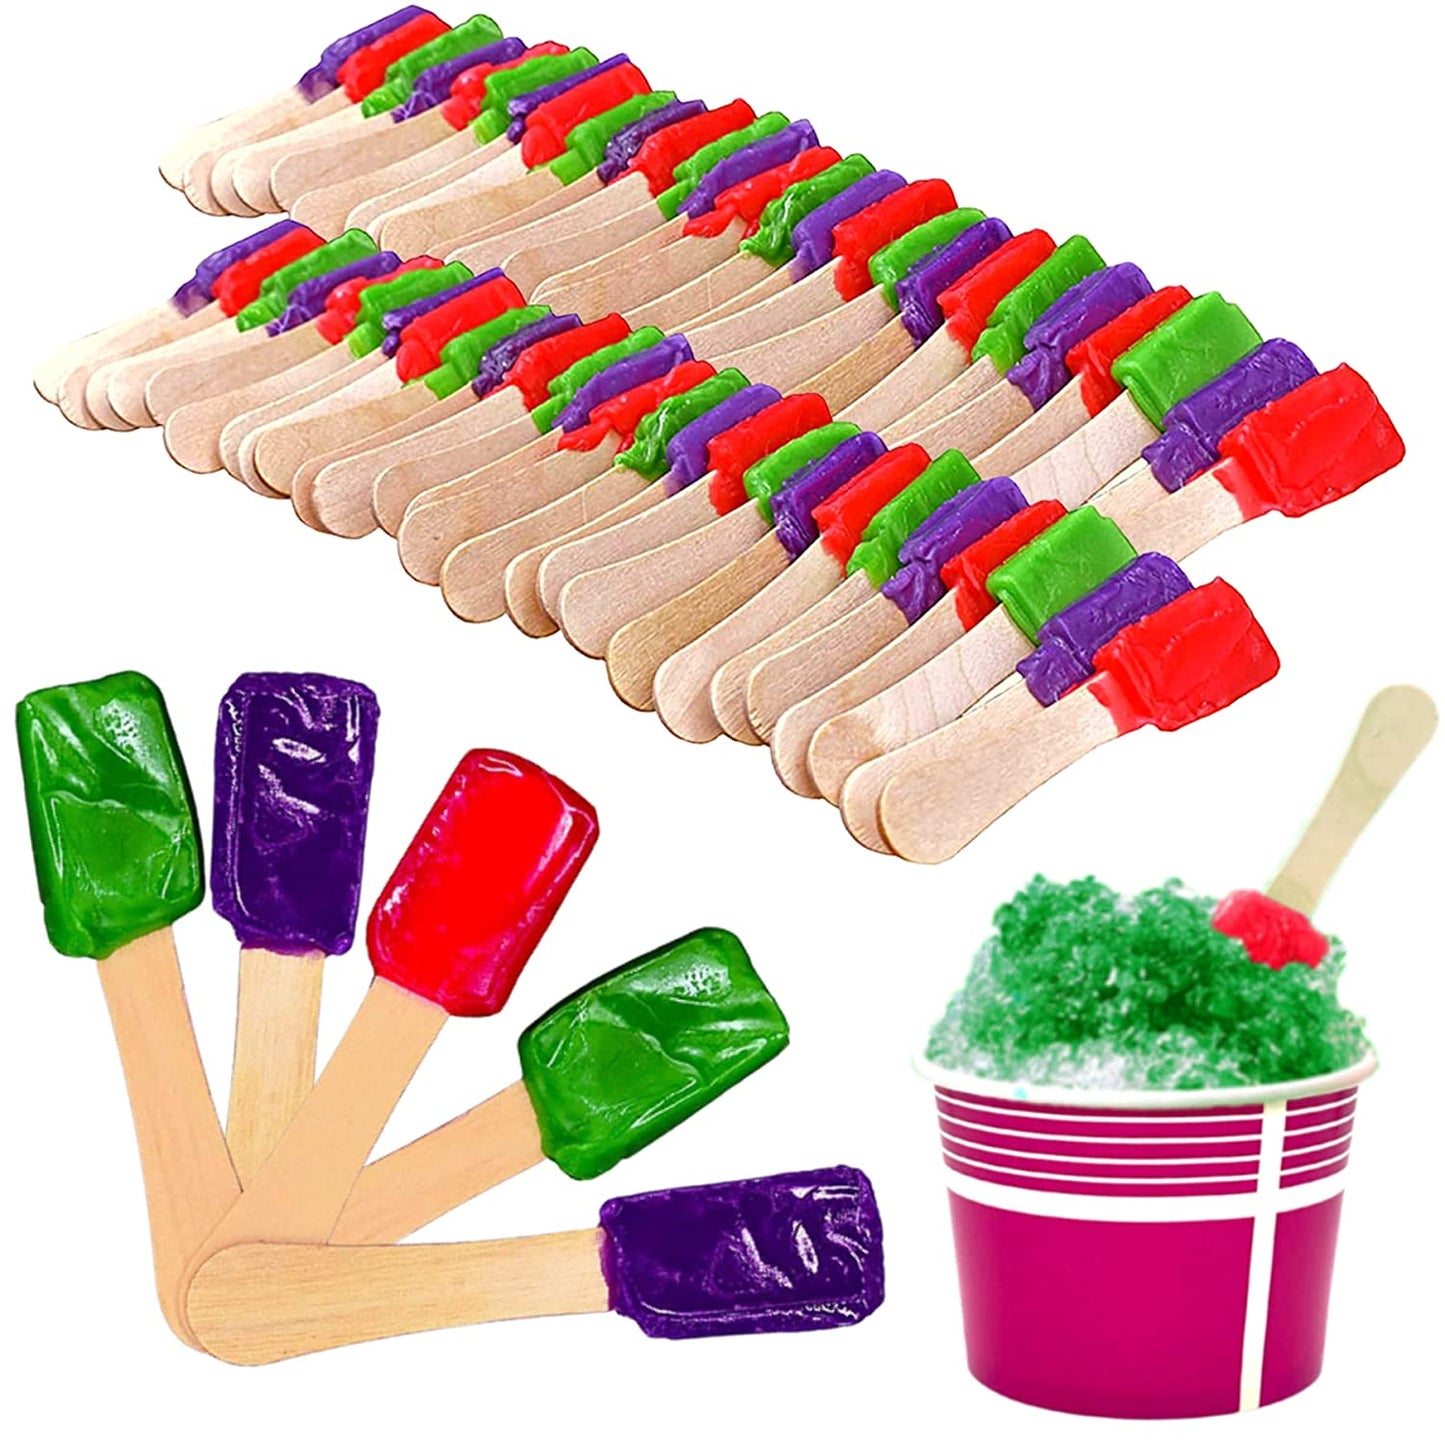 Concession Essentials Pack of 60 4" Candy Spoons